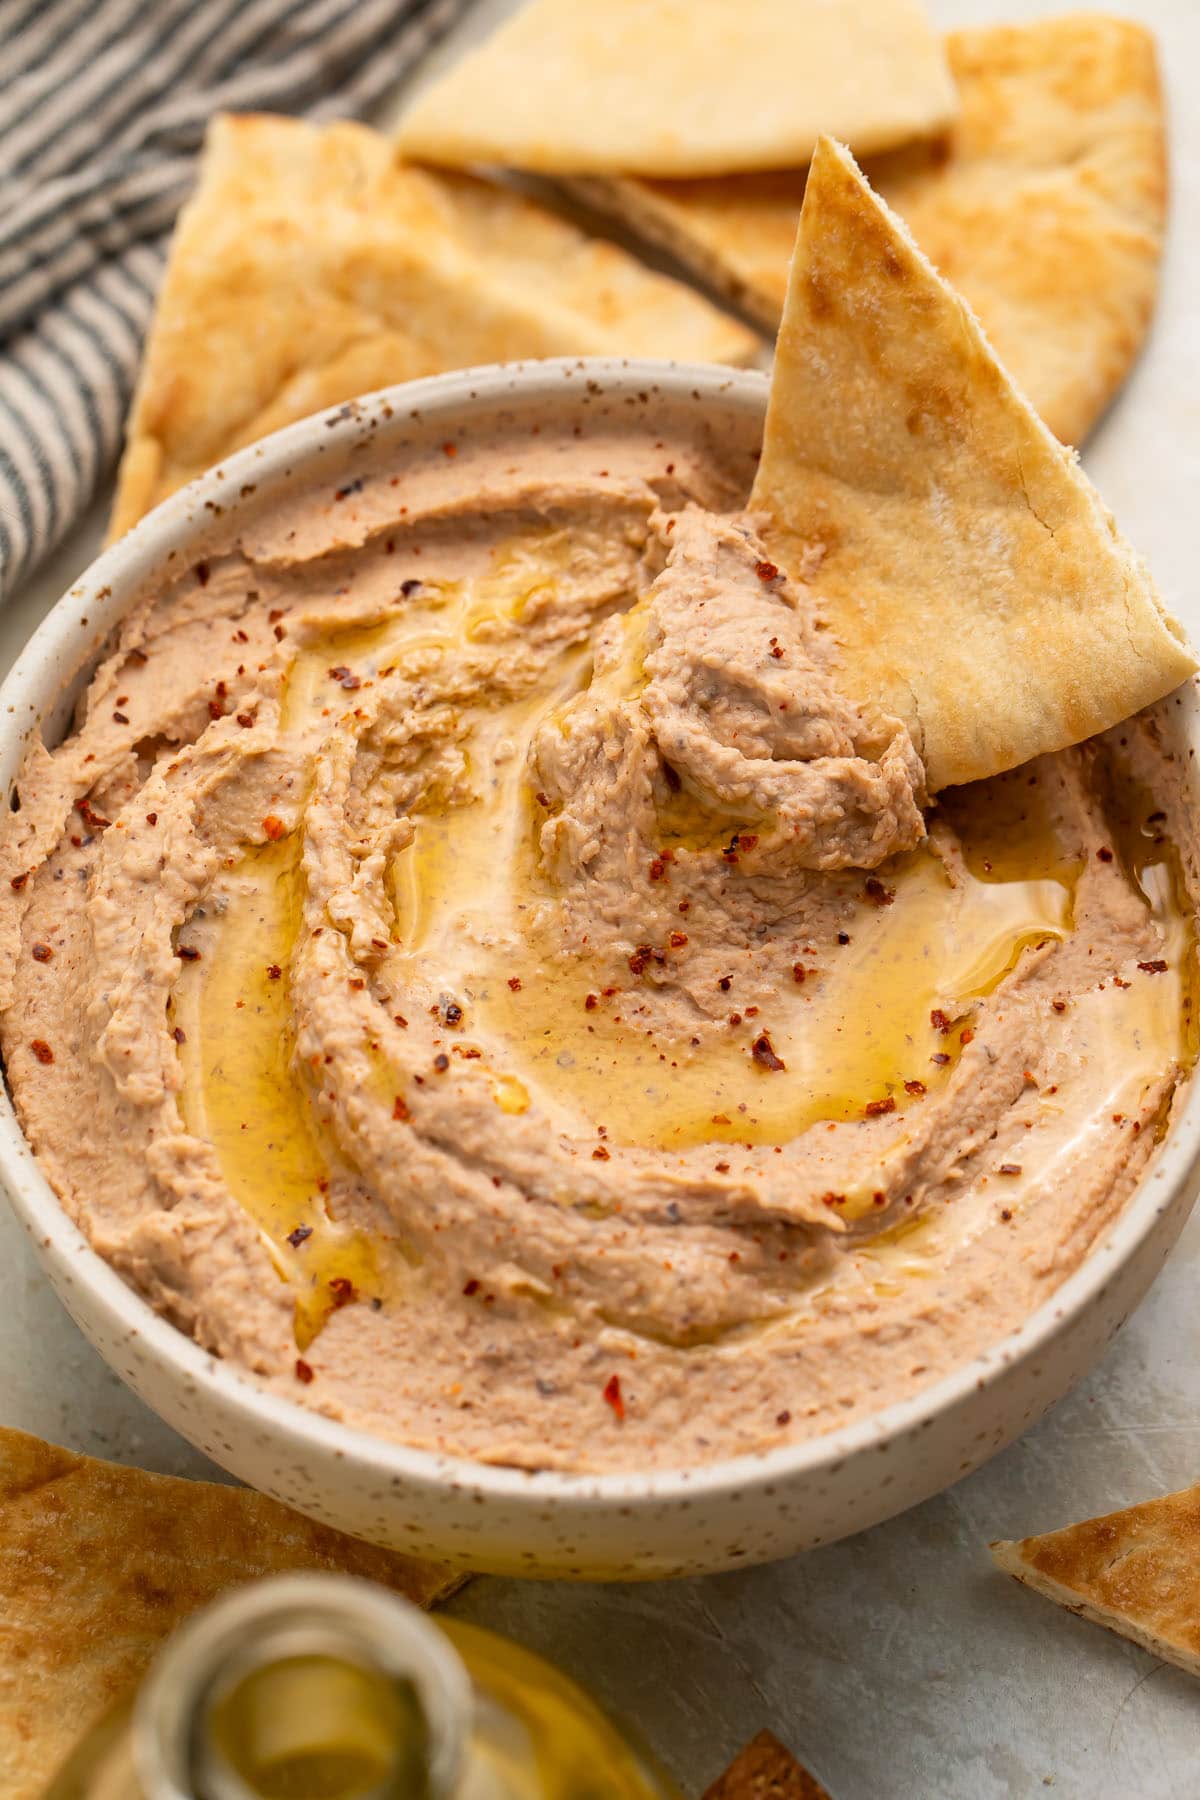 A triangular pita chip resting in a bowl of black eyed pea hummus, with a scoop of hummus on the chip.